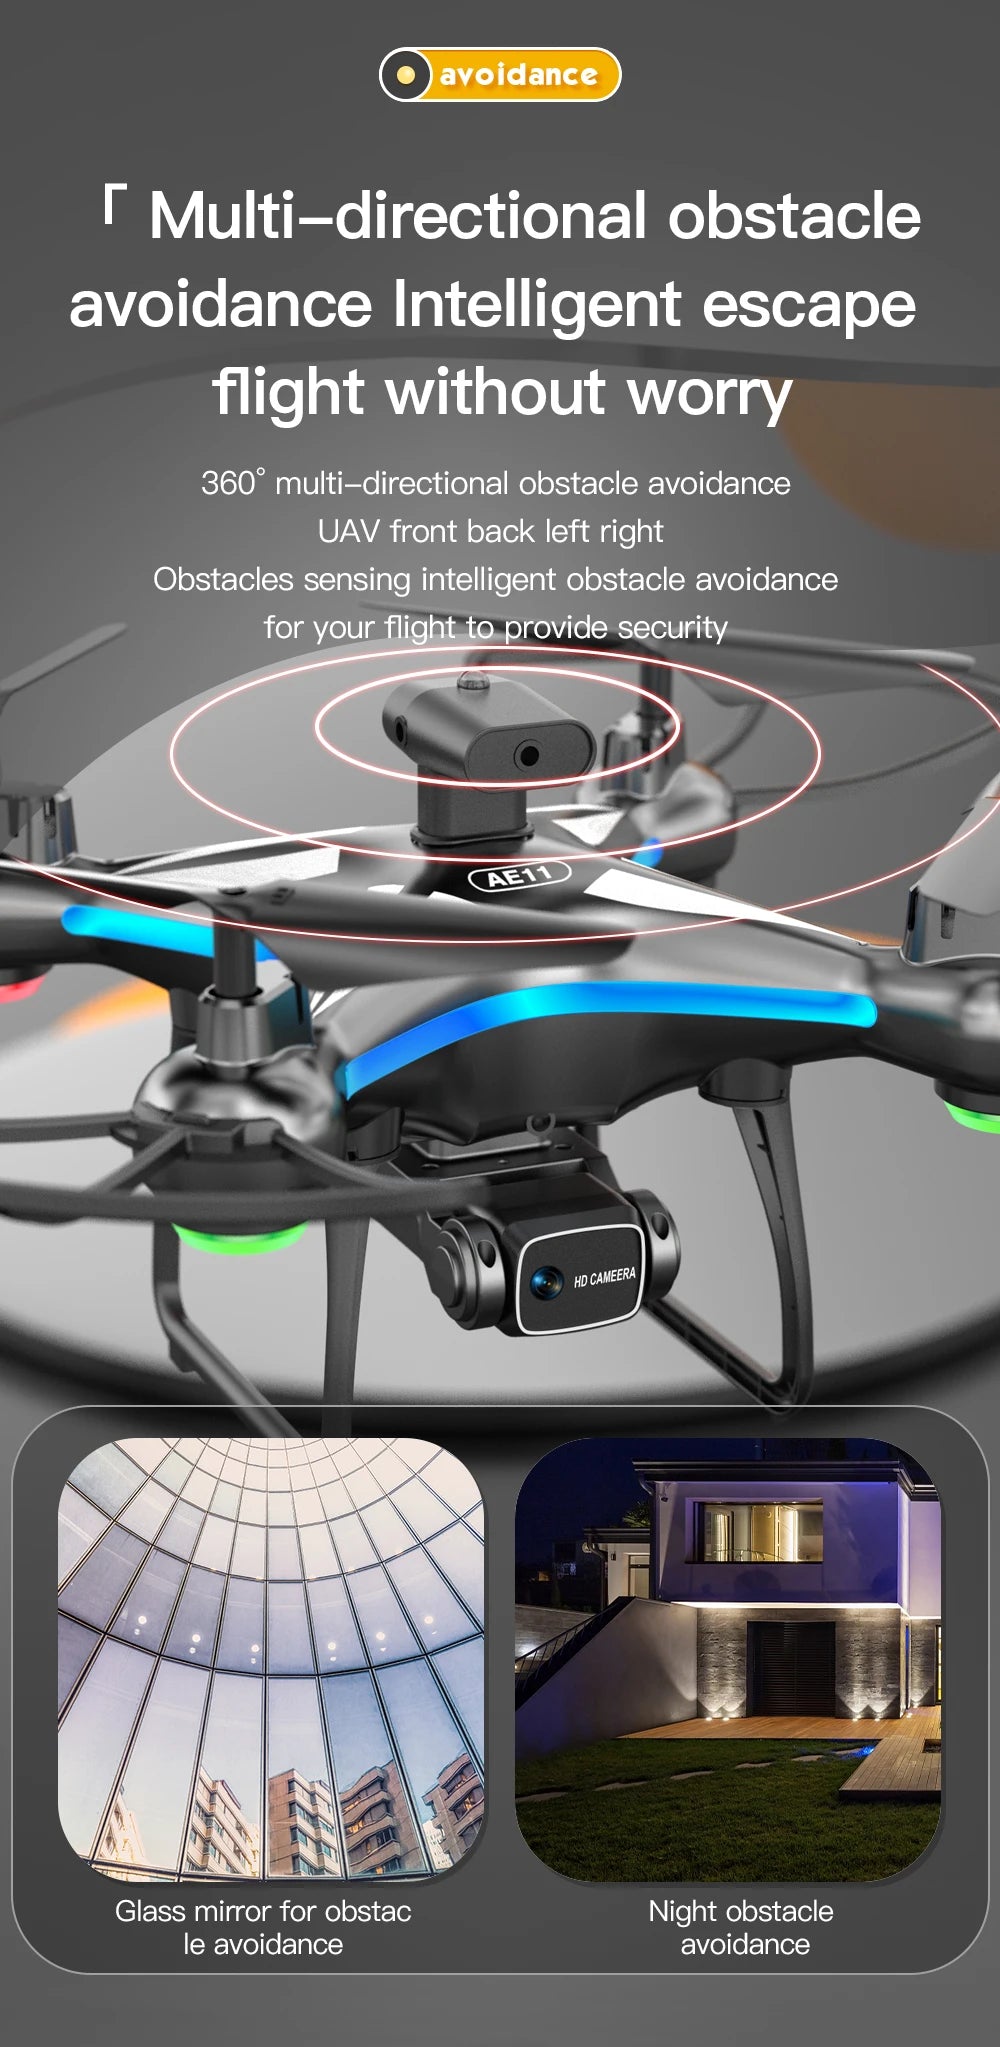 AE11 Drone, avoidance multi-directional obstacle avoidance intelligent escape flight without worry 360